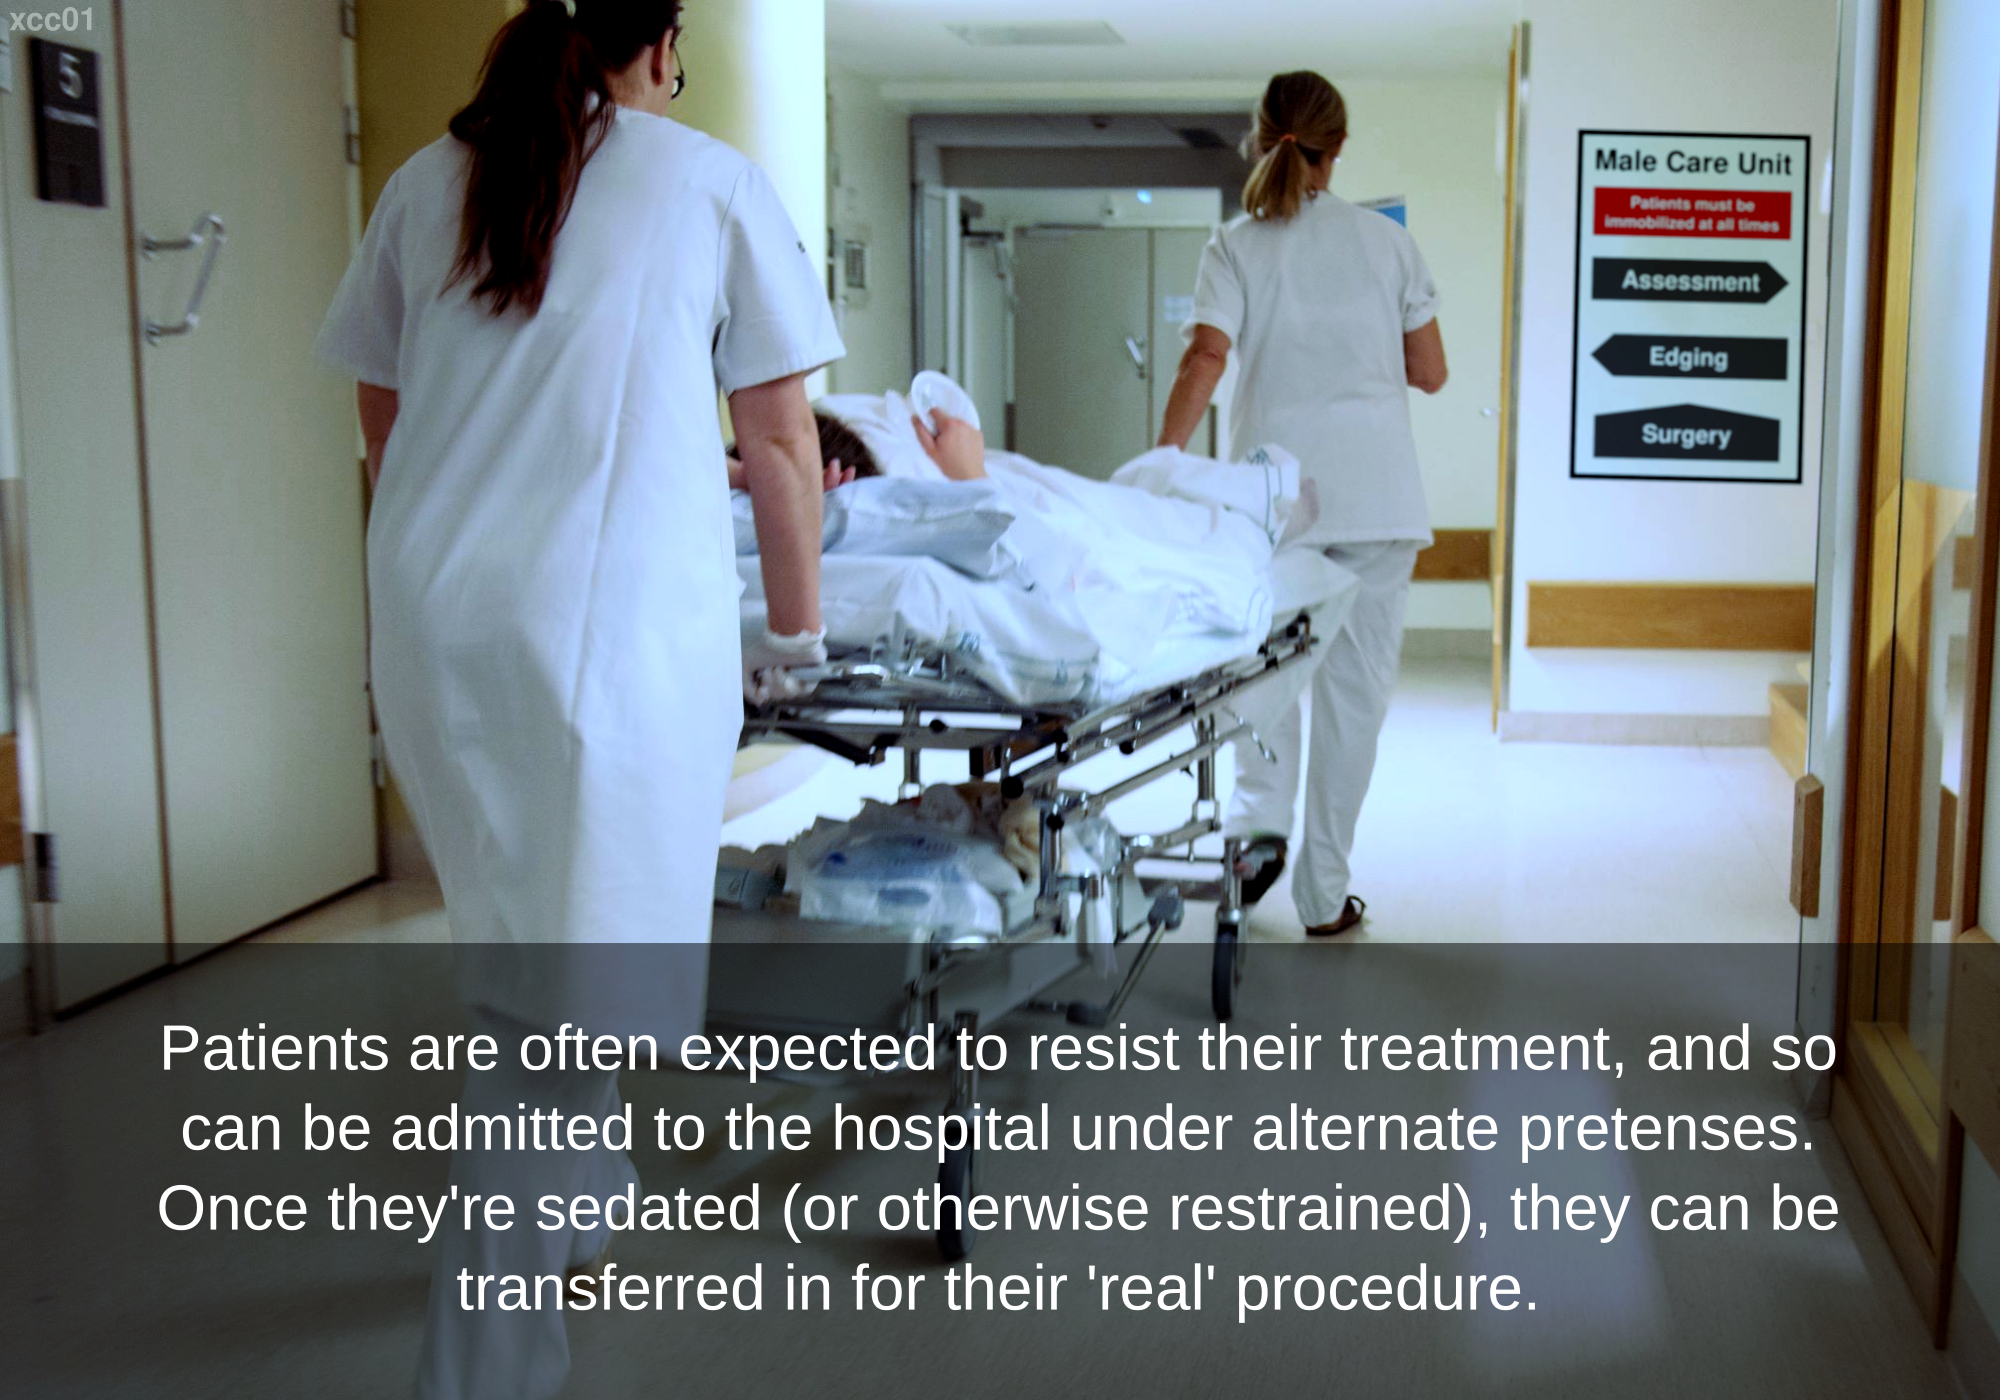 Patients are often expected to resist their treatment, and so can be admitted to the hospital under alternate pretenses. Once they're sedated (or otherwise restrained), they can be transferred in for their 'real' procedure.
